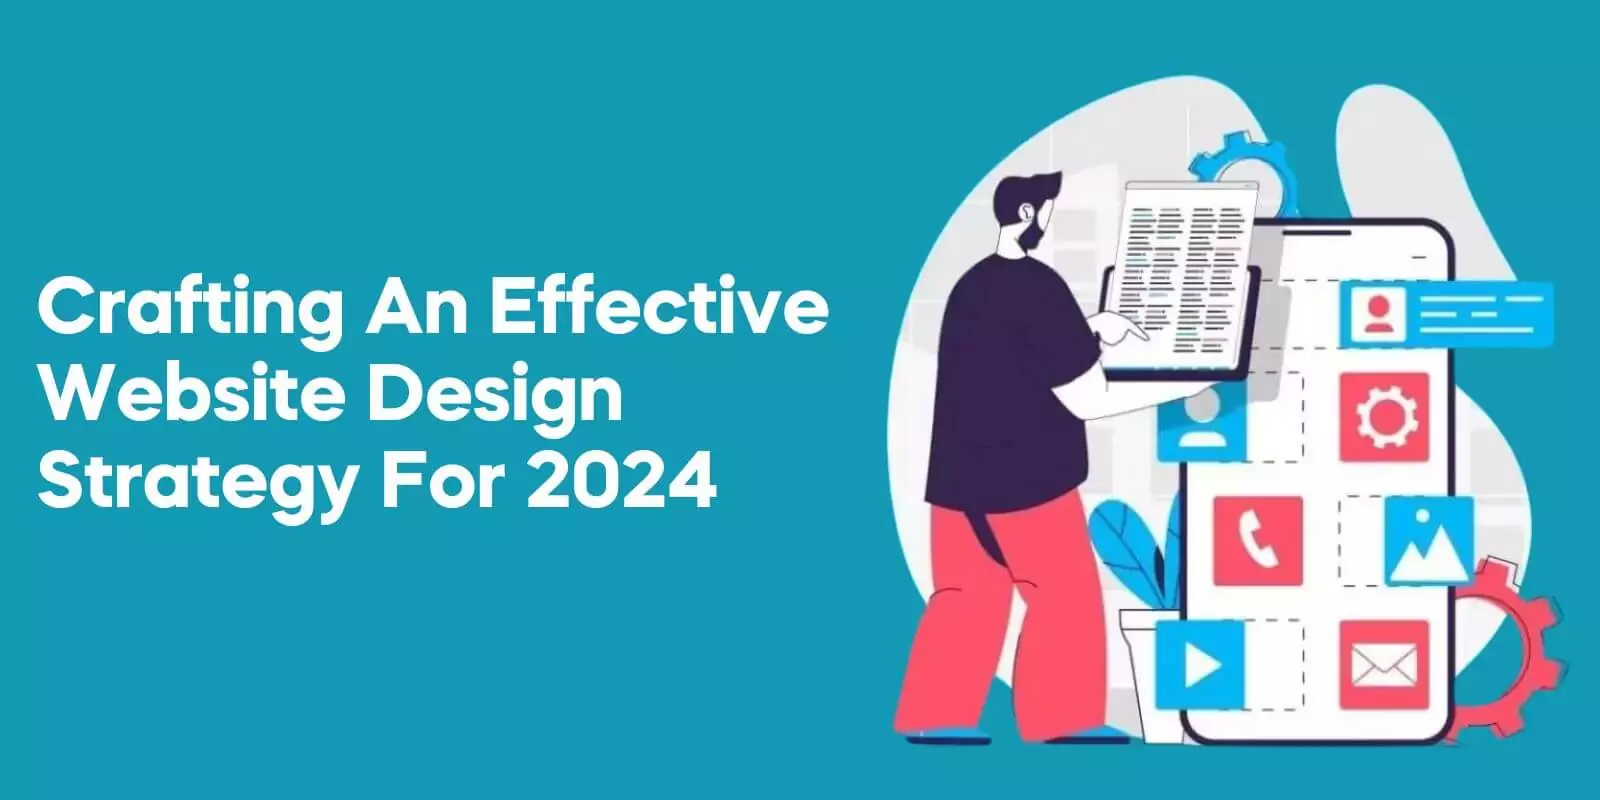 Crafting an Effective Website Design Strategy for 2024